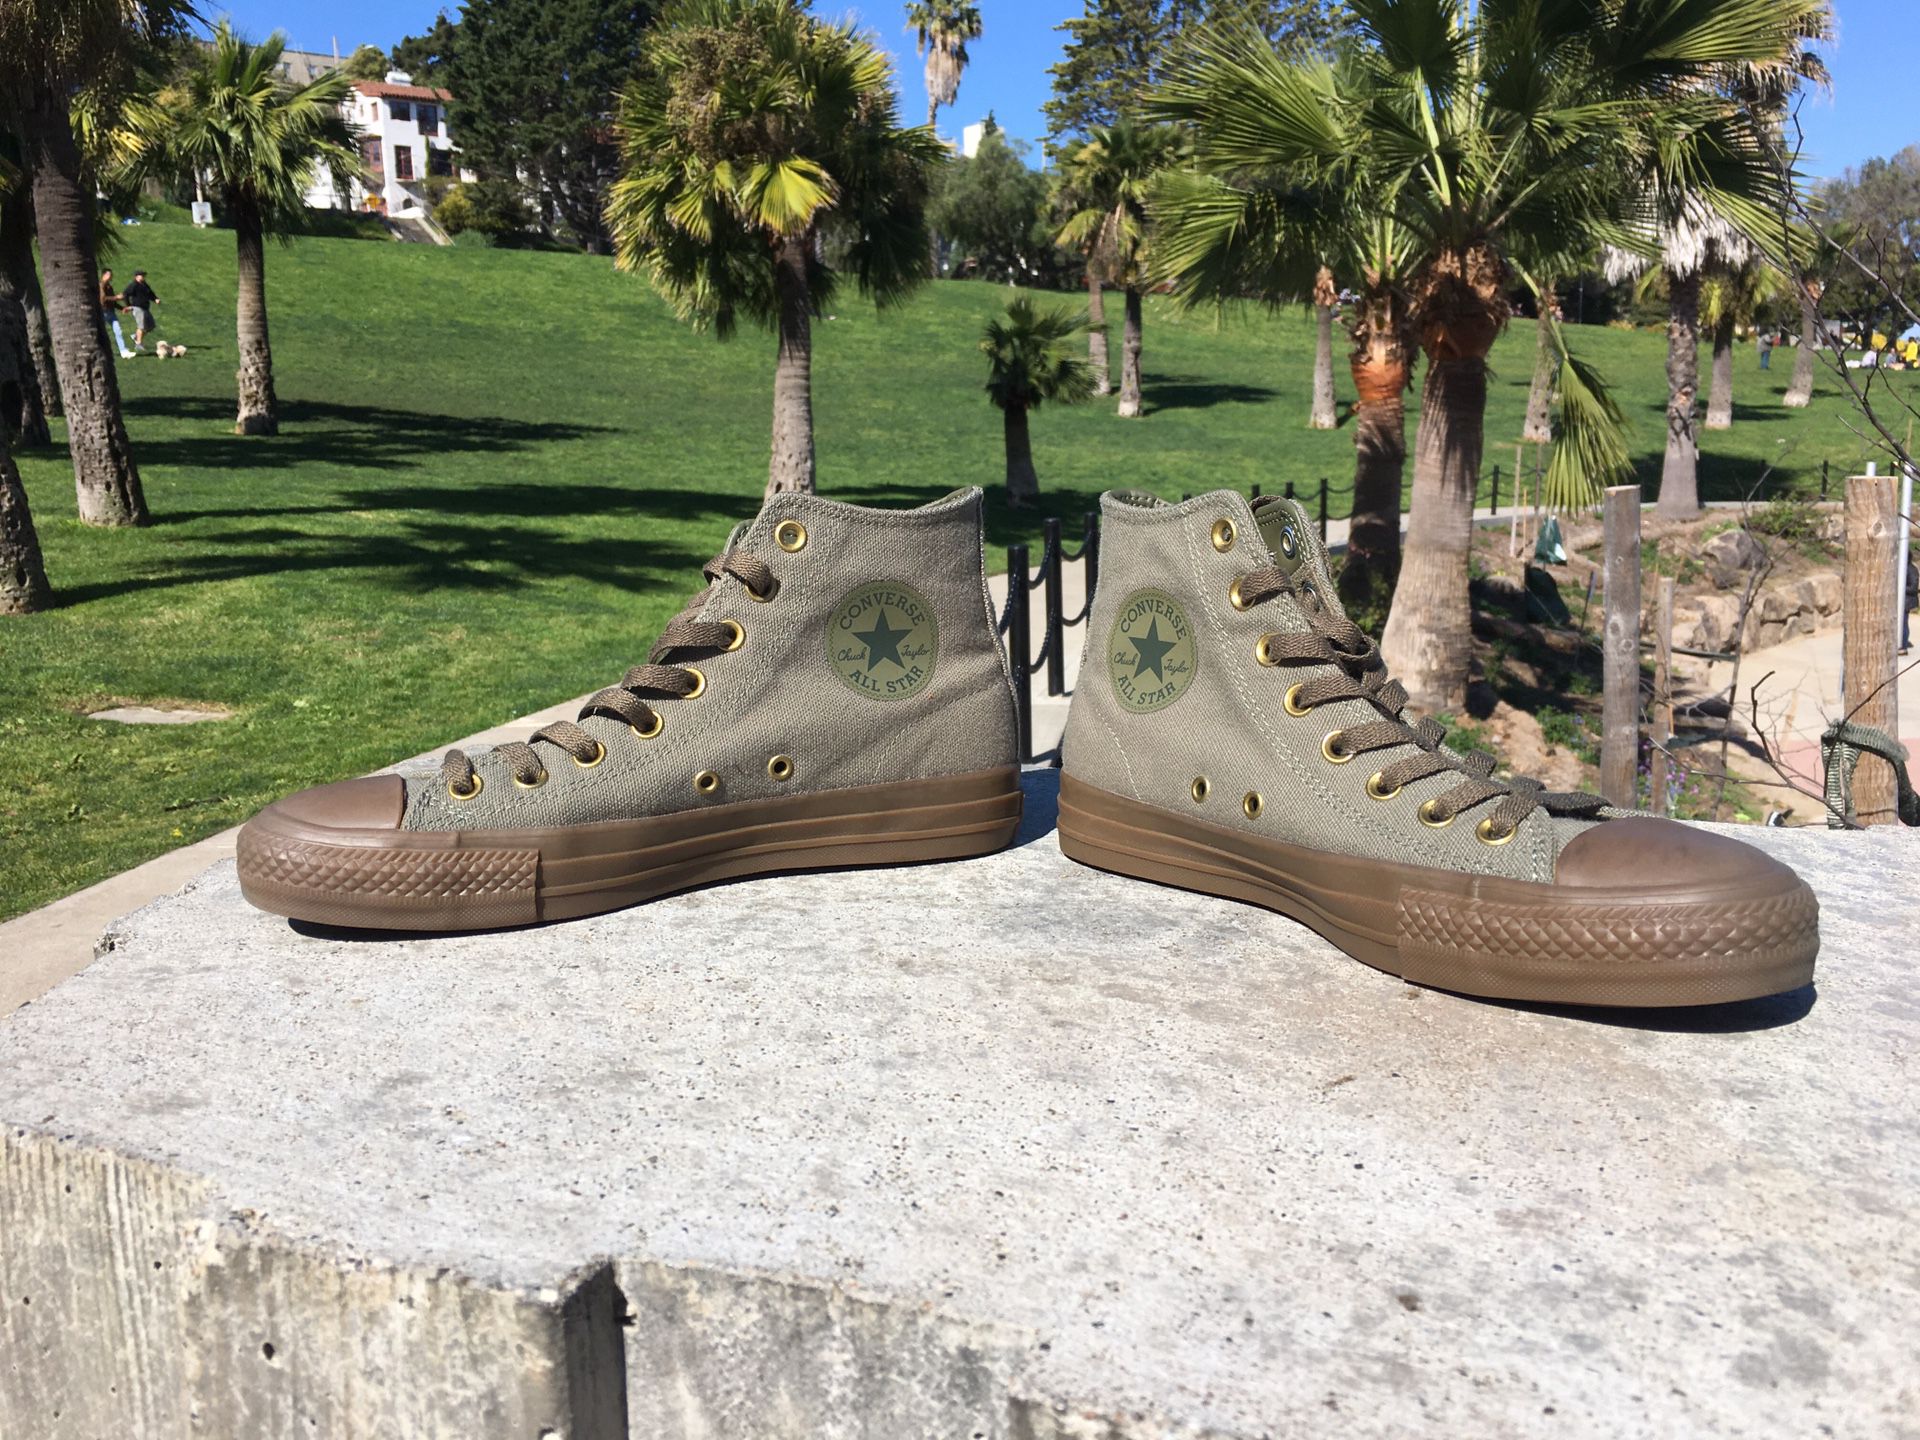 Converse X Kevin Rodrigues CTAS Pro Hi Canvas 161076C Medium Skate Shoes 7 Brand new without box for Sale in Riverside, CA - OfferUp